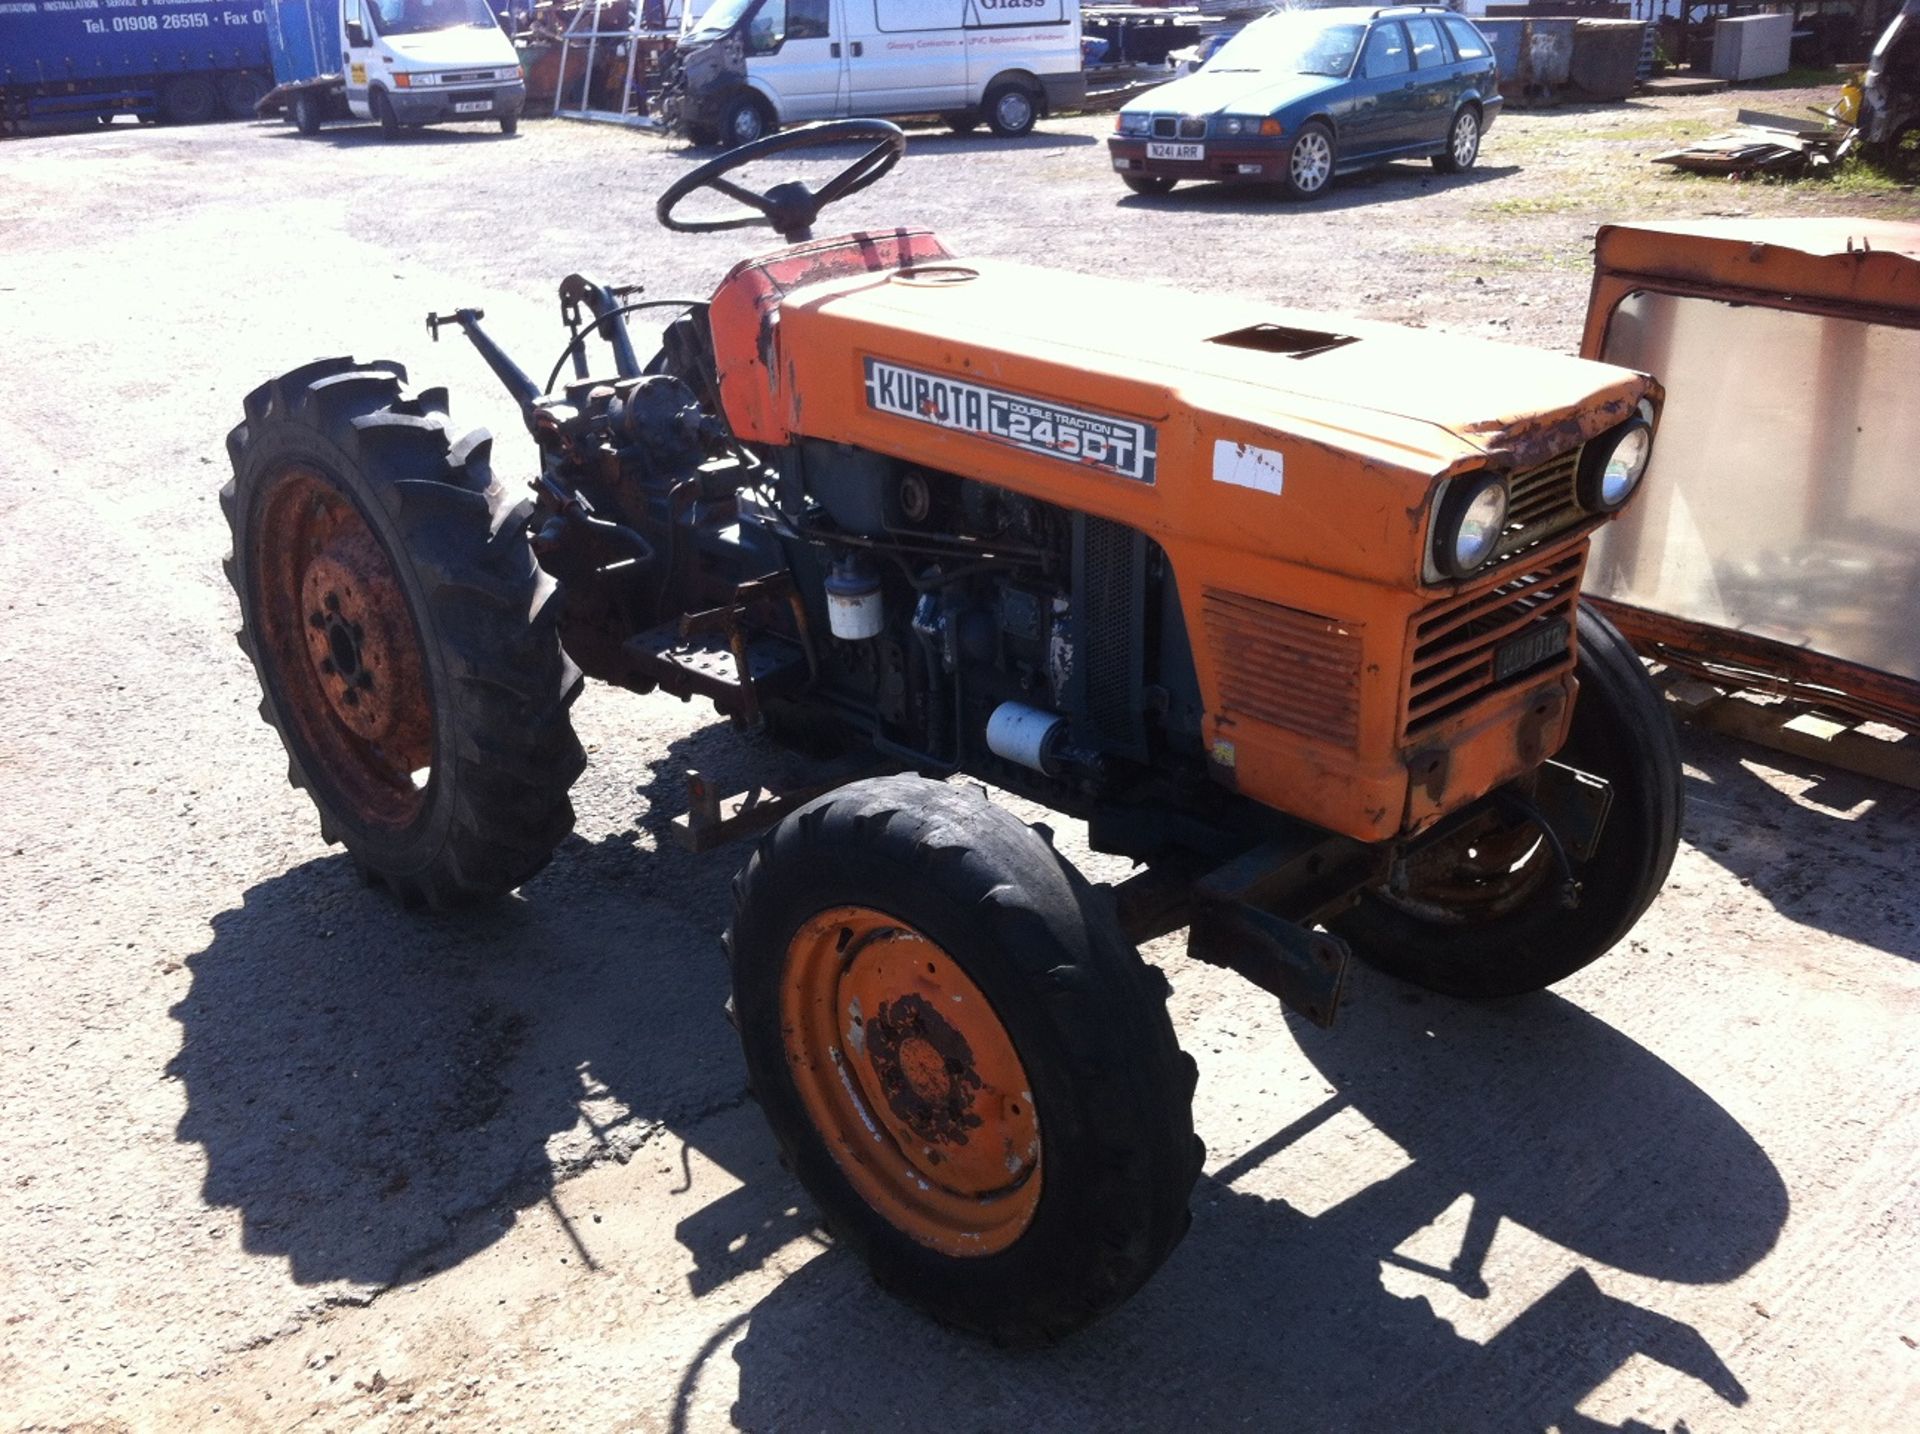 KUBOTA DOUBLE TRACTION L245DT TRACTOR *NO VAT*
 
25 HP ENGINE
4 WHEEL DRIVE
HIGH AND LOW RANGE